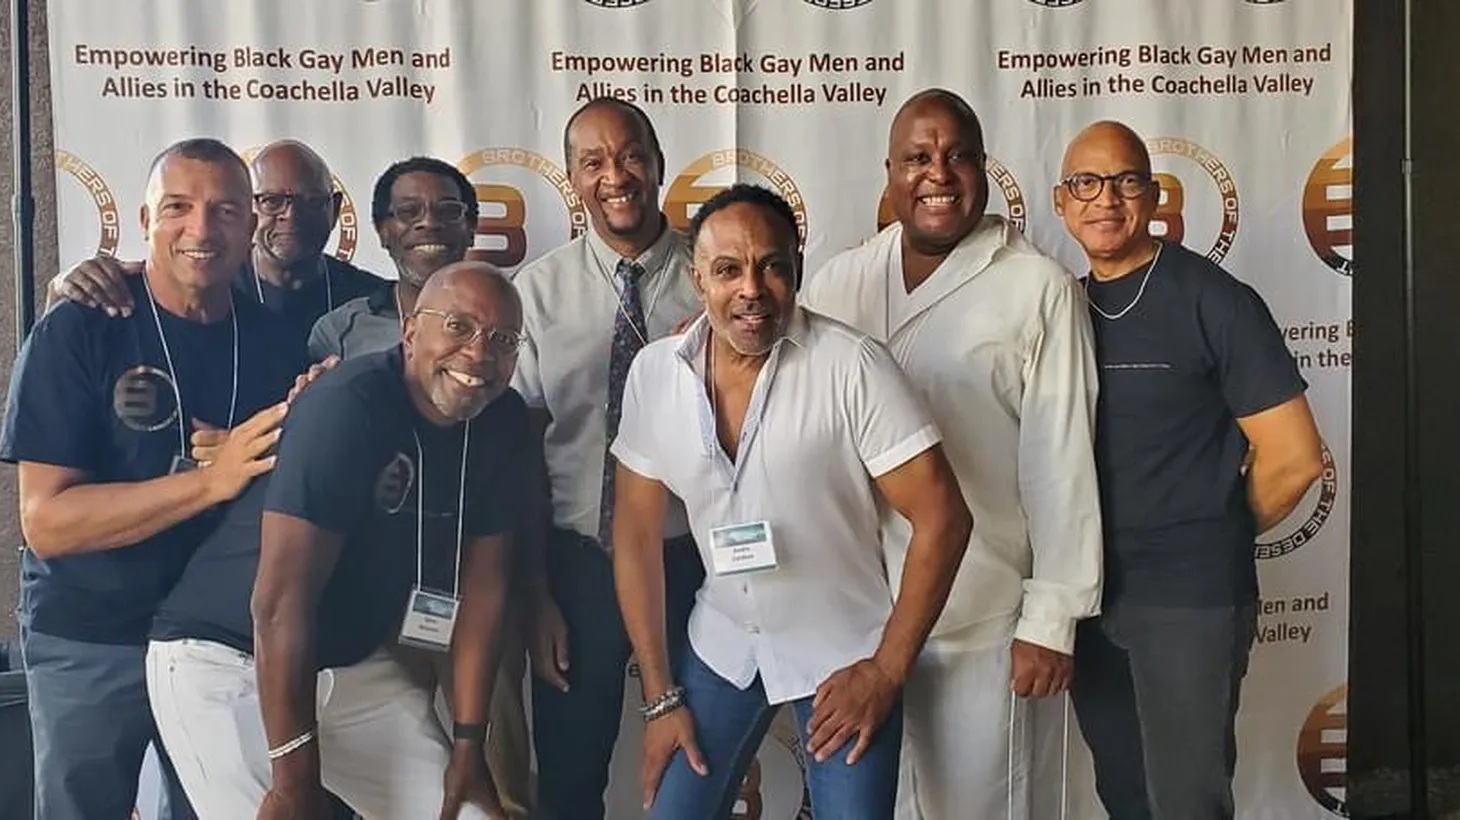 This year’s Brothers of the Desert wellness summit was the first time that many members of the group were able to meet in person since the pandemic began. “Our mission is to empower Black gay men and allies, and we do that through advocacy, education, mentorship, social networking, volunteerism and philanthropy,” says Brothers of the Desert co-founder Tim Vincent.